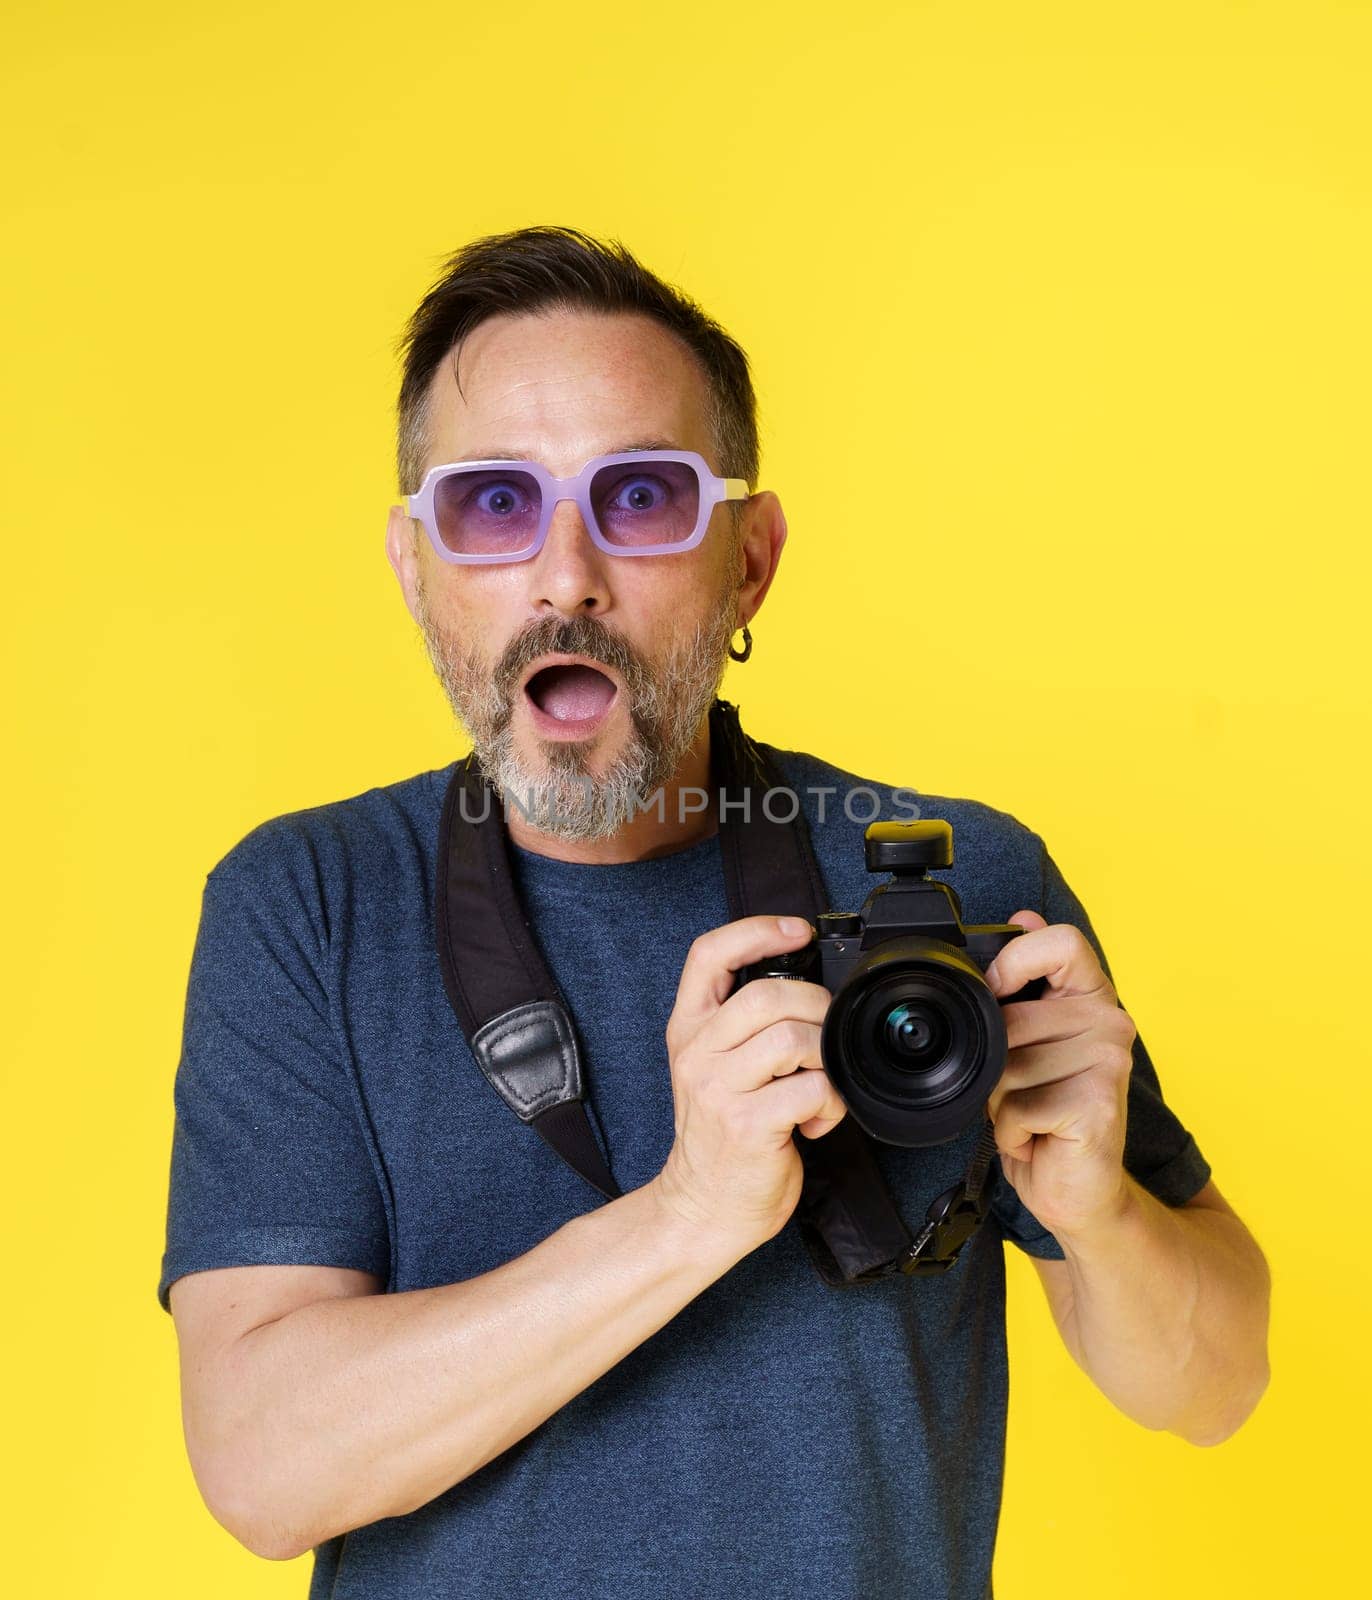 Passionate old photographer beams with excitement, holding mirrorless photo camera, in isolated studio shot on yellow background. Seasoned photographer continues pursue photography passion with zeal. by LipikStockMedia